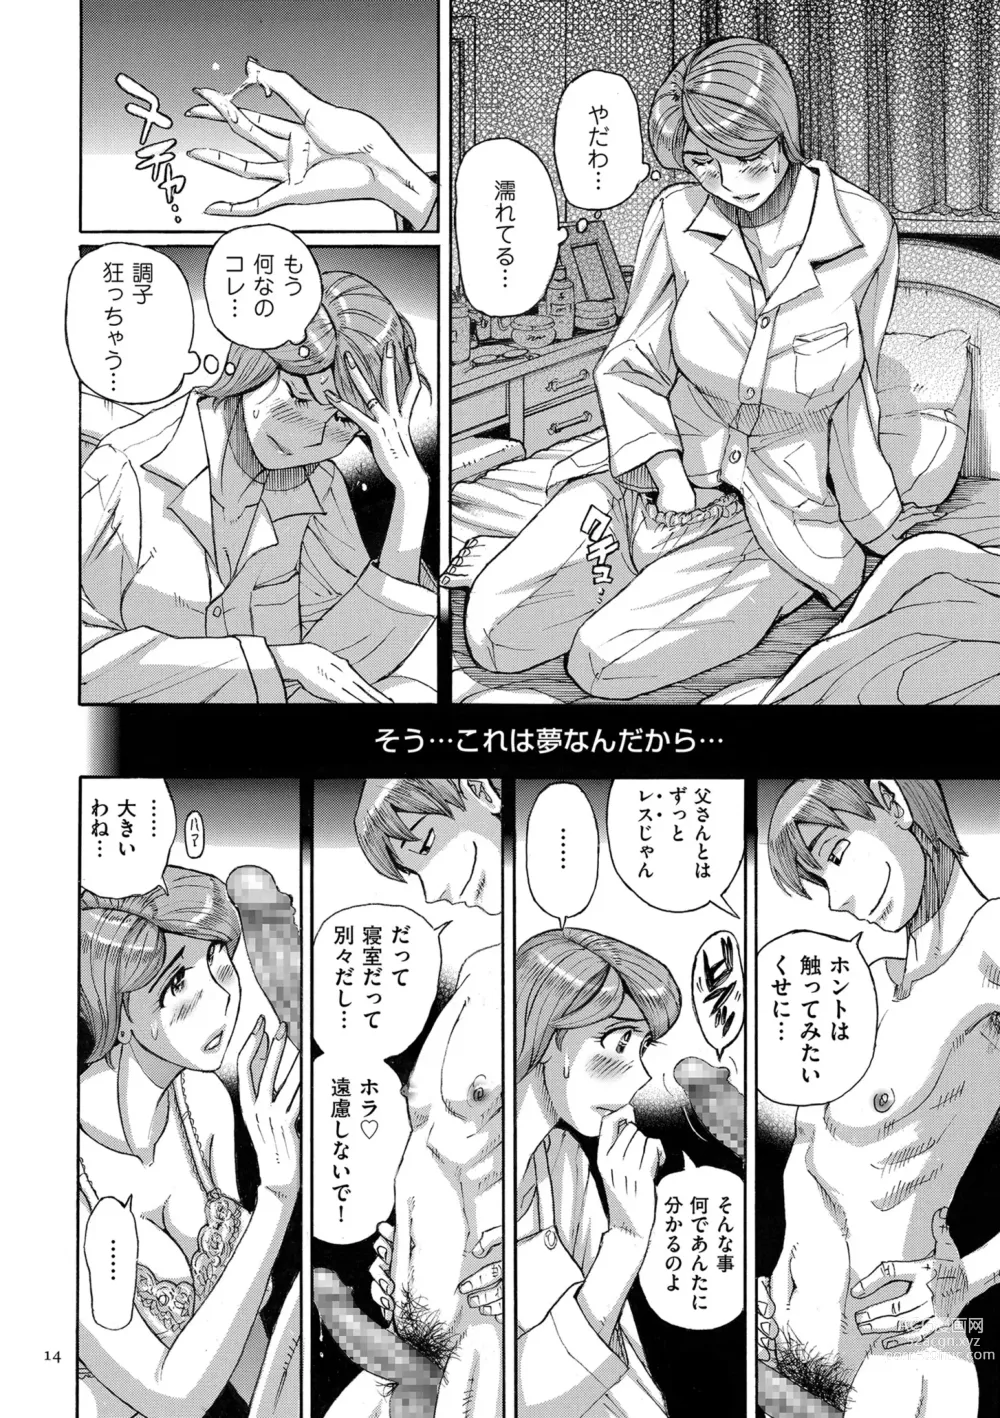 Page 14 of manga Mother’s Care Service How to ’Wincest’